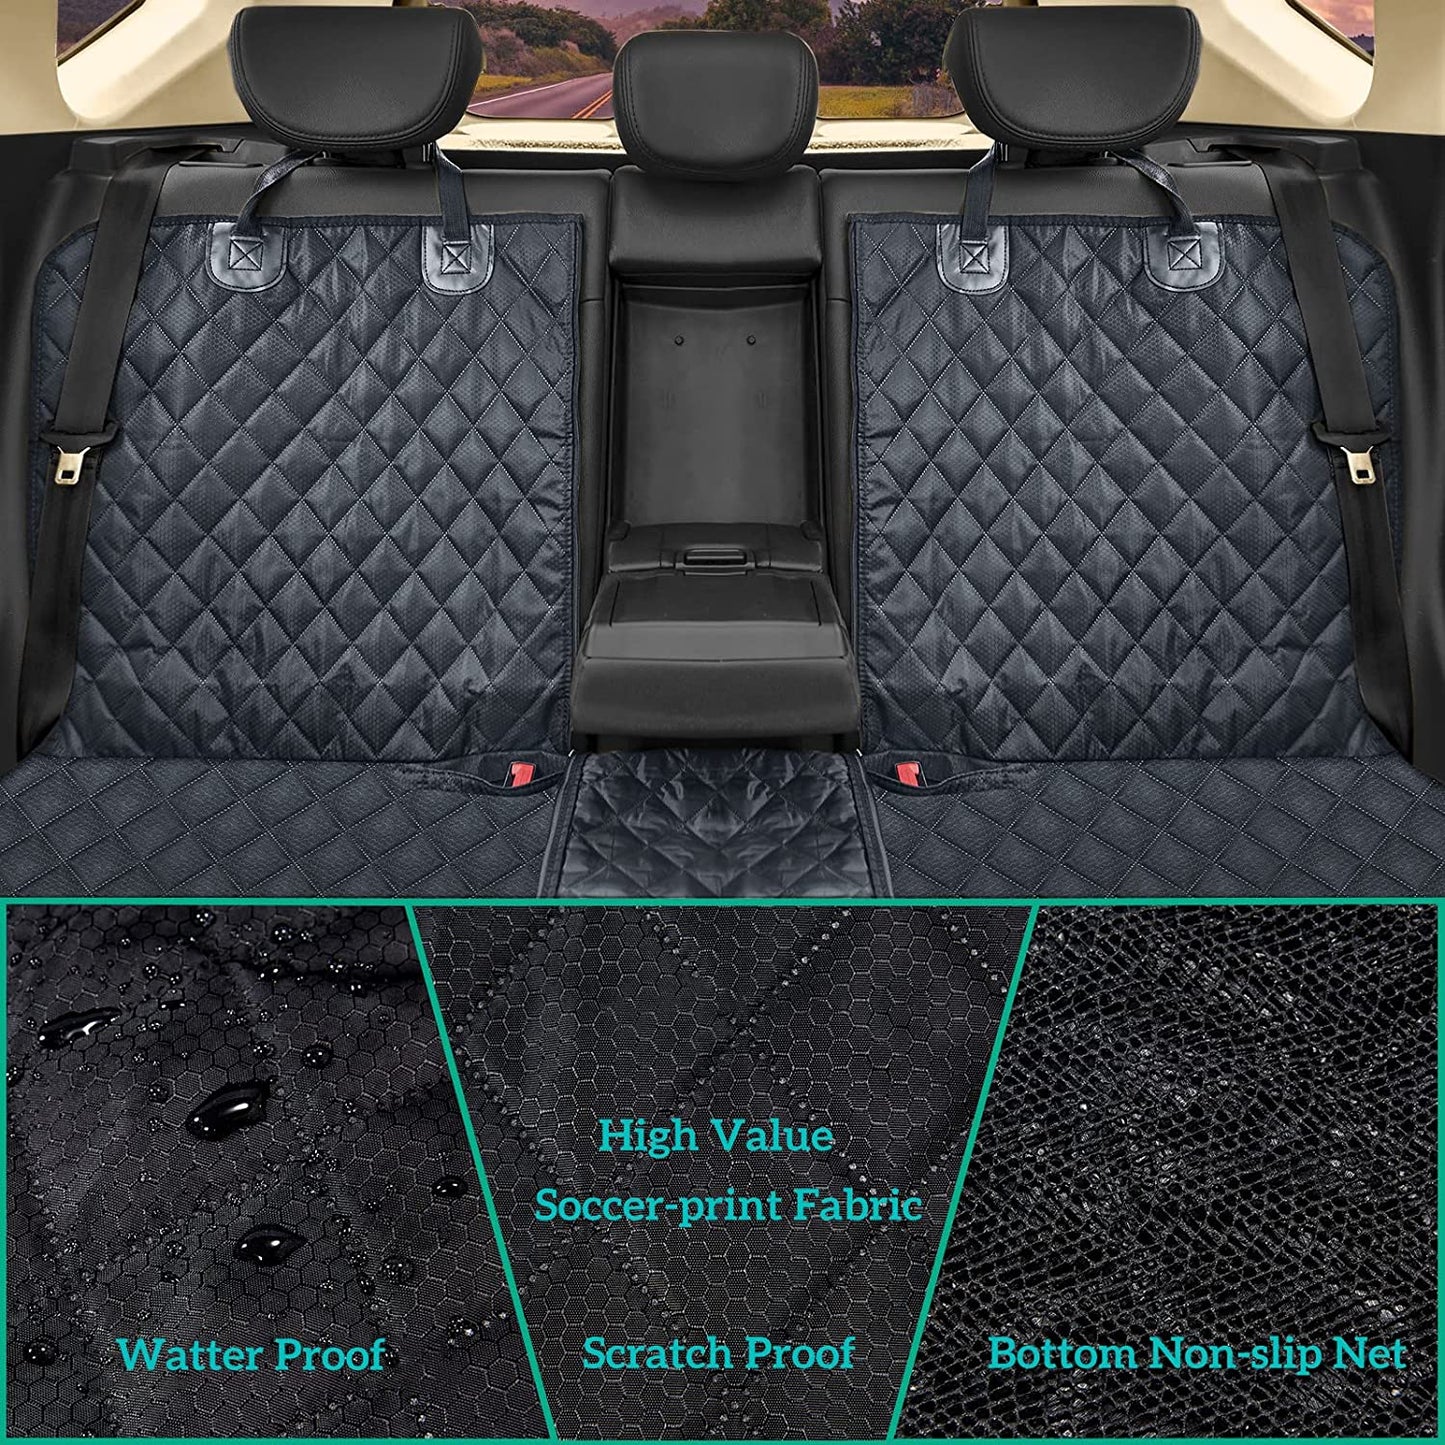 Dog Car Seat Cover for Back Seat Cover for Kids,Non Stick Fur Rear Seat Protector for Pet,Nonslip Waterproof Durable Universal Fit Interior Backseat Covers for Auto Van SUV